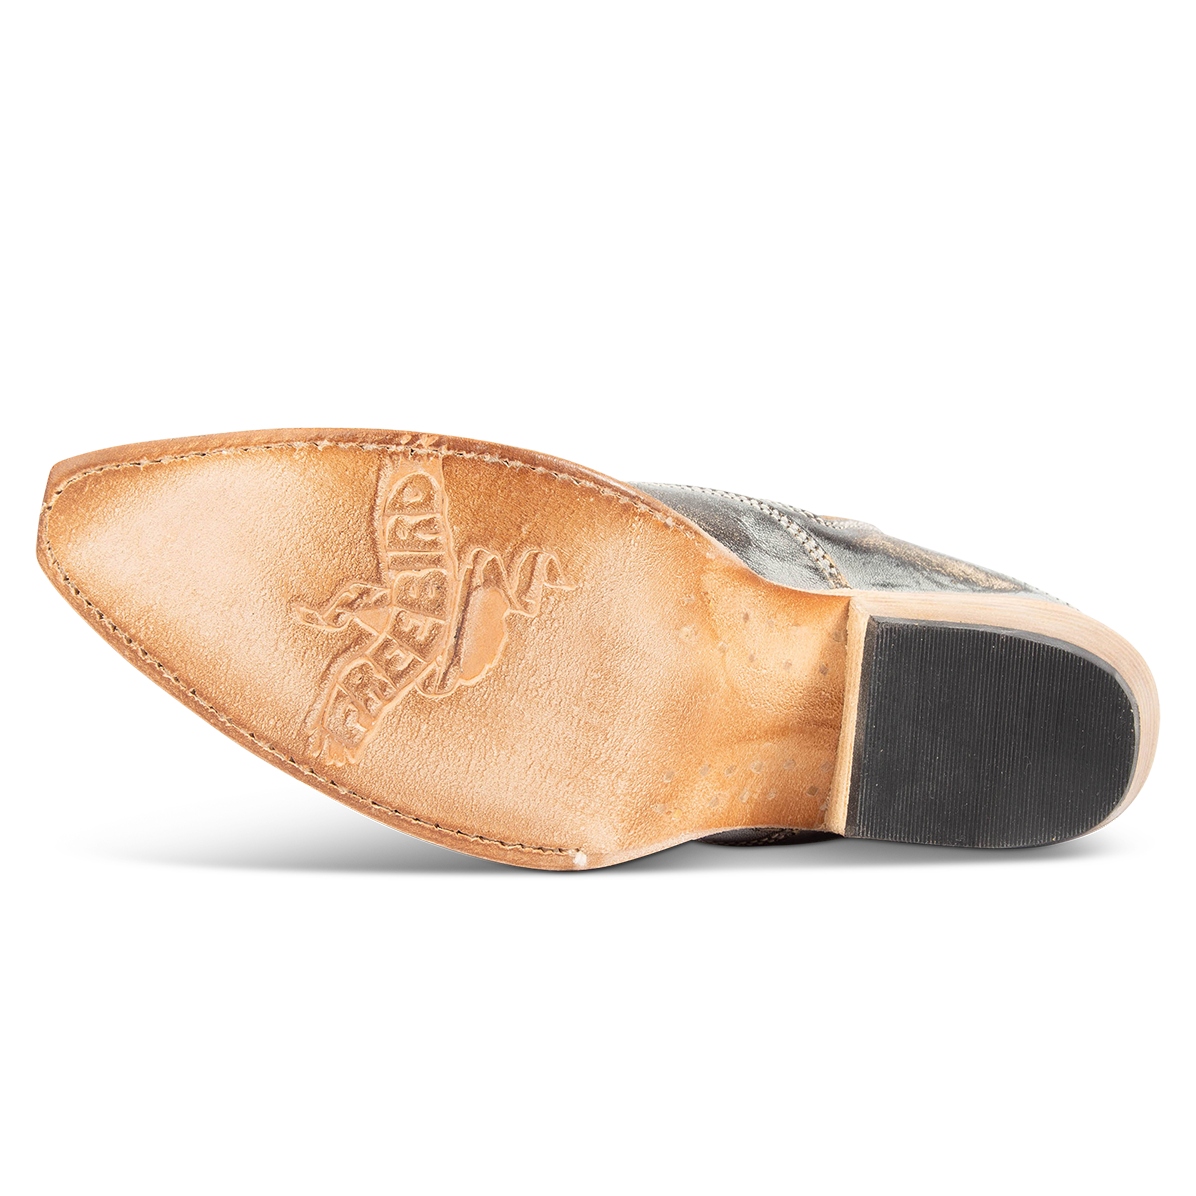 Leather sole imprinted with FREEBIRD on women's Wentworth ice western mule